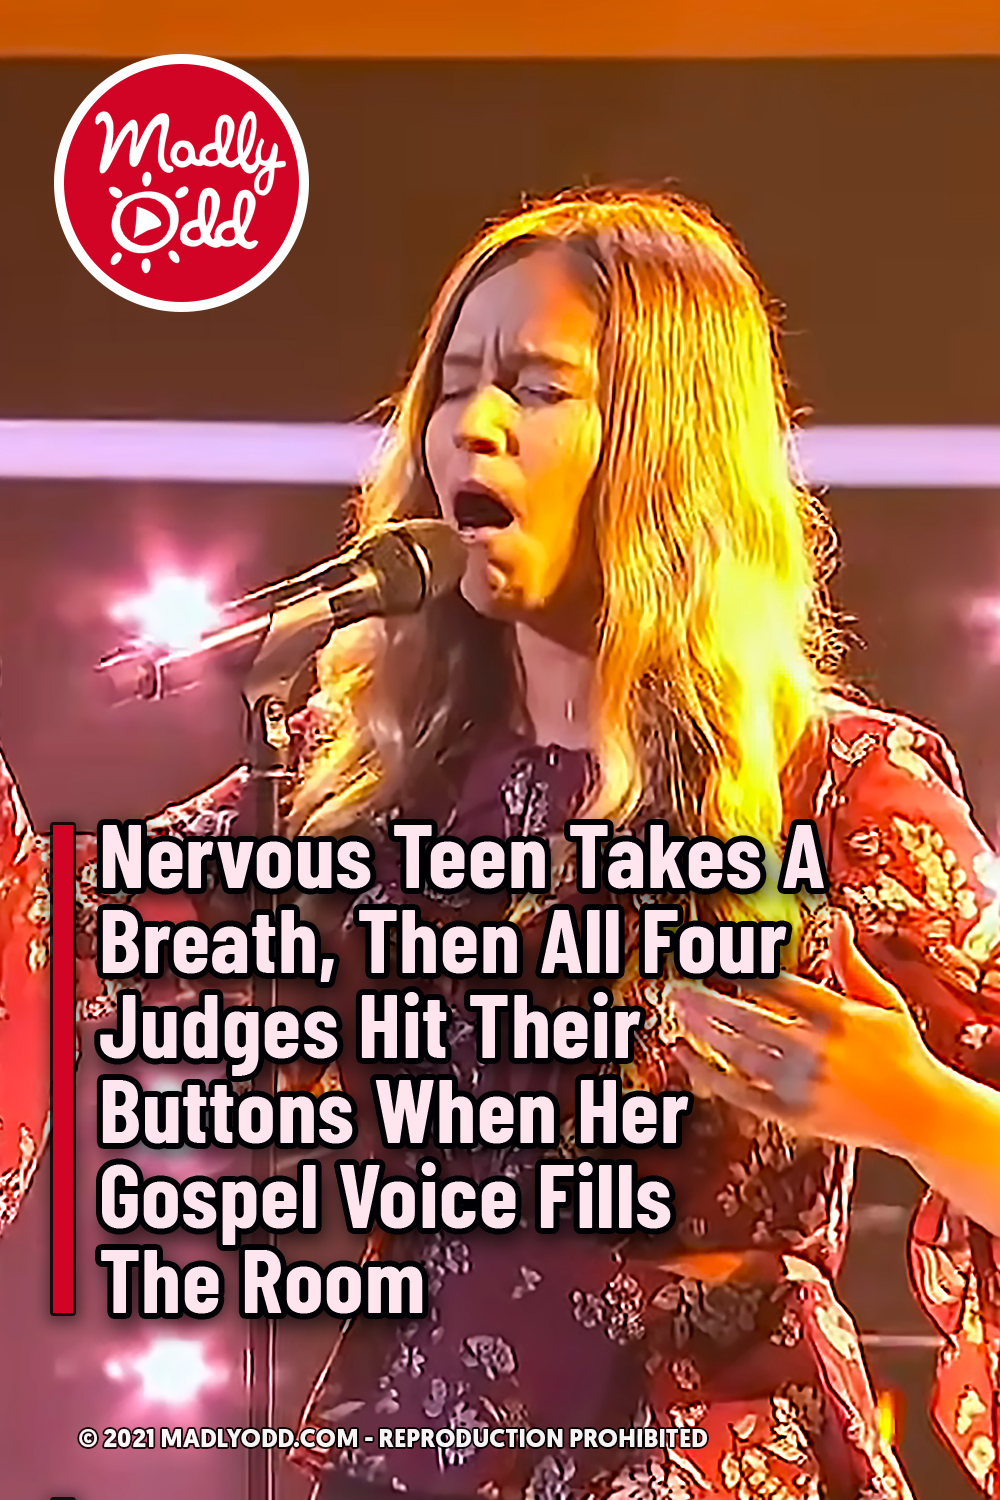 Nervous Teen Takes A Breath, Then All Four Judges Hit Their Buttons When Her Gospel Voice Fills The Room